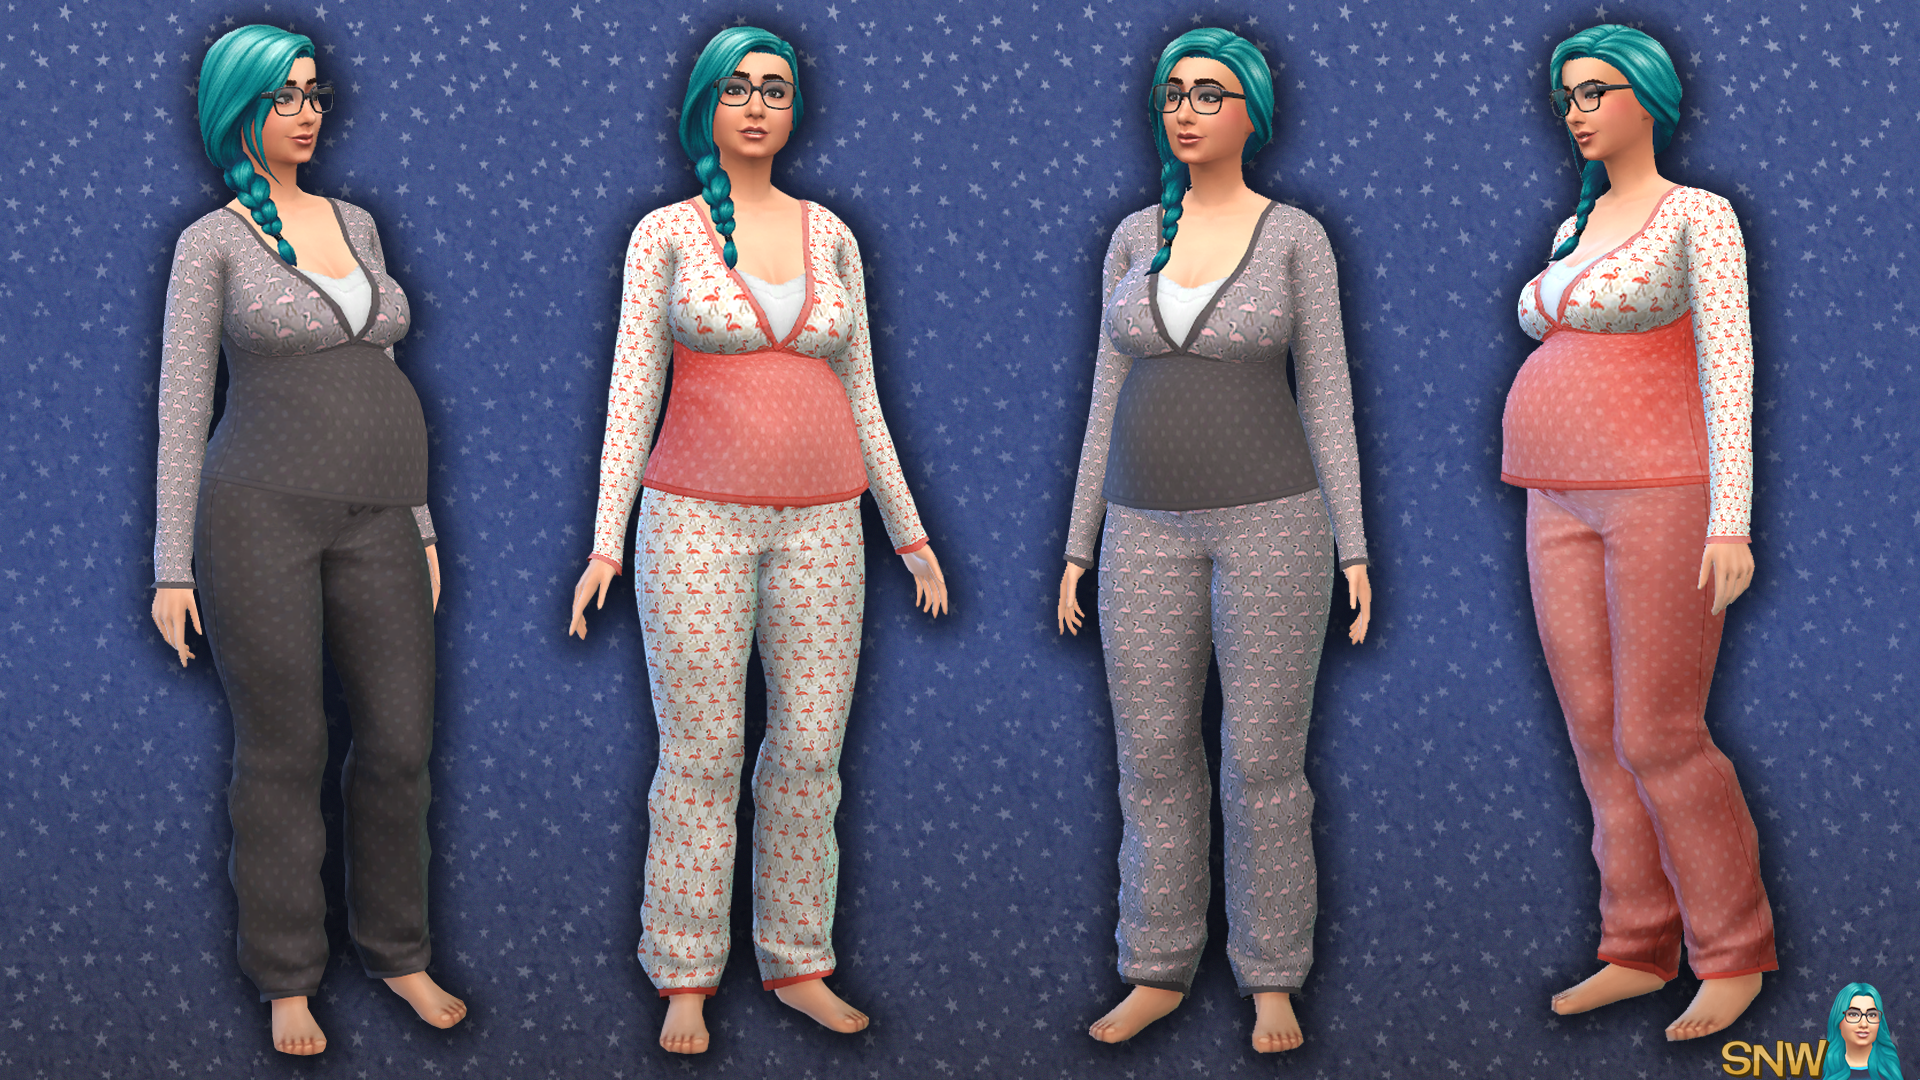 sims 4 teen pregnancy mod get together